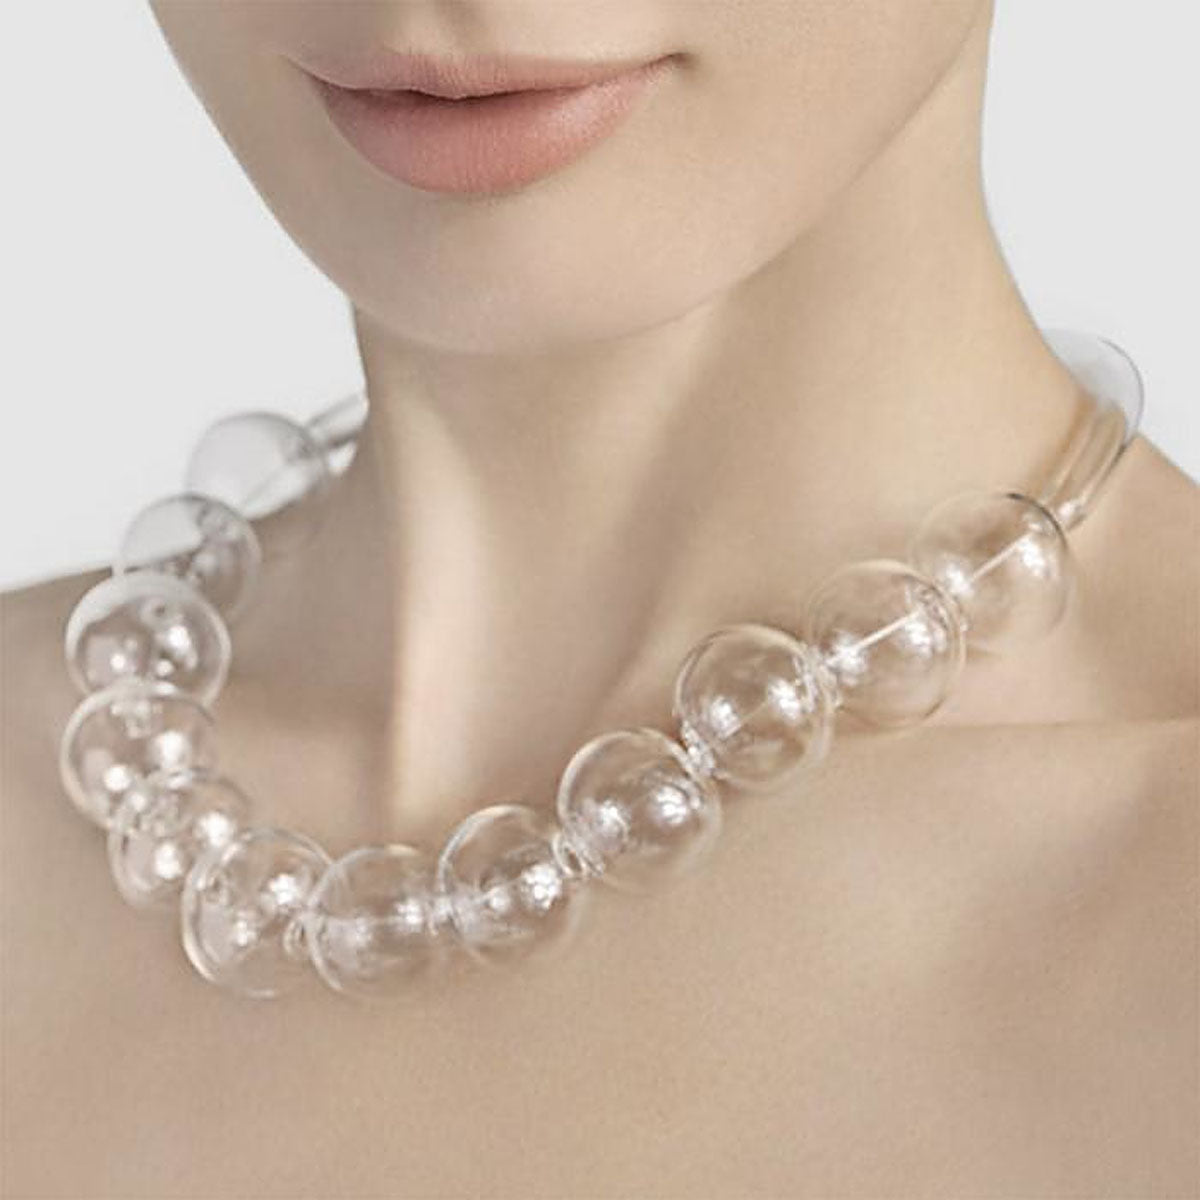 Art Style Glass Bubble Necklace Modern Hollow Clear Bead Pearl Accessories